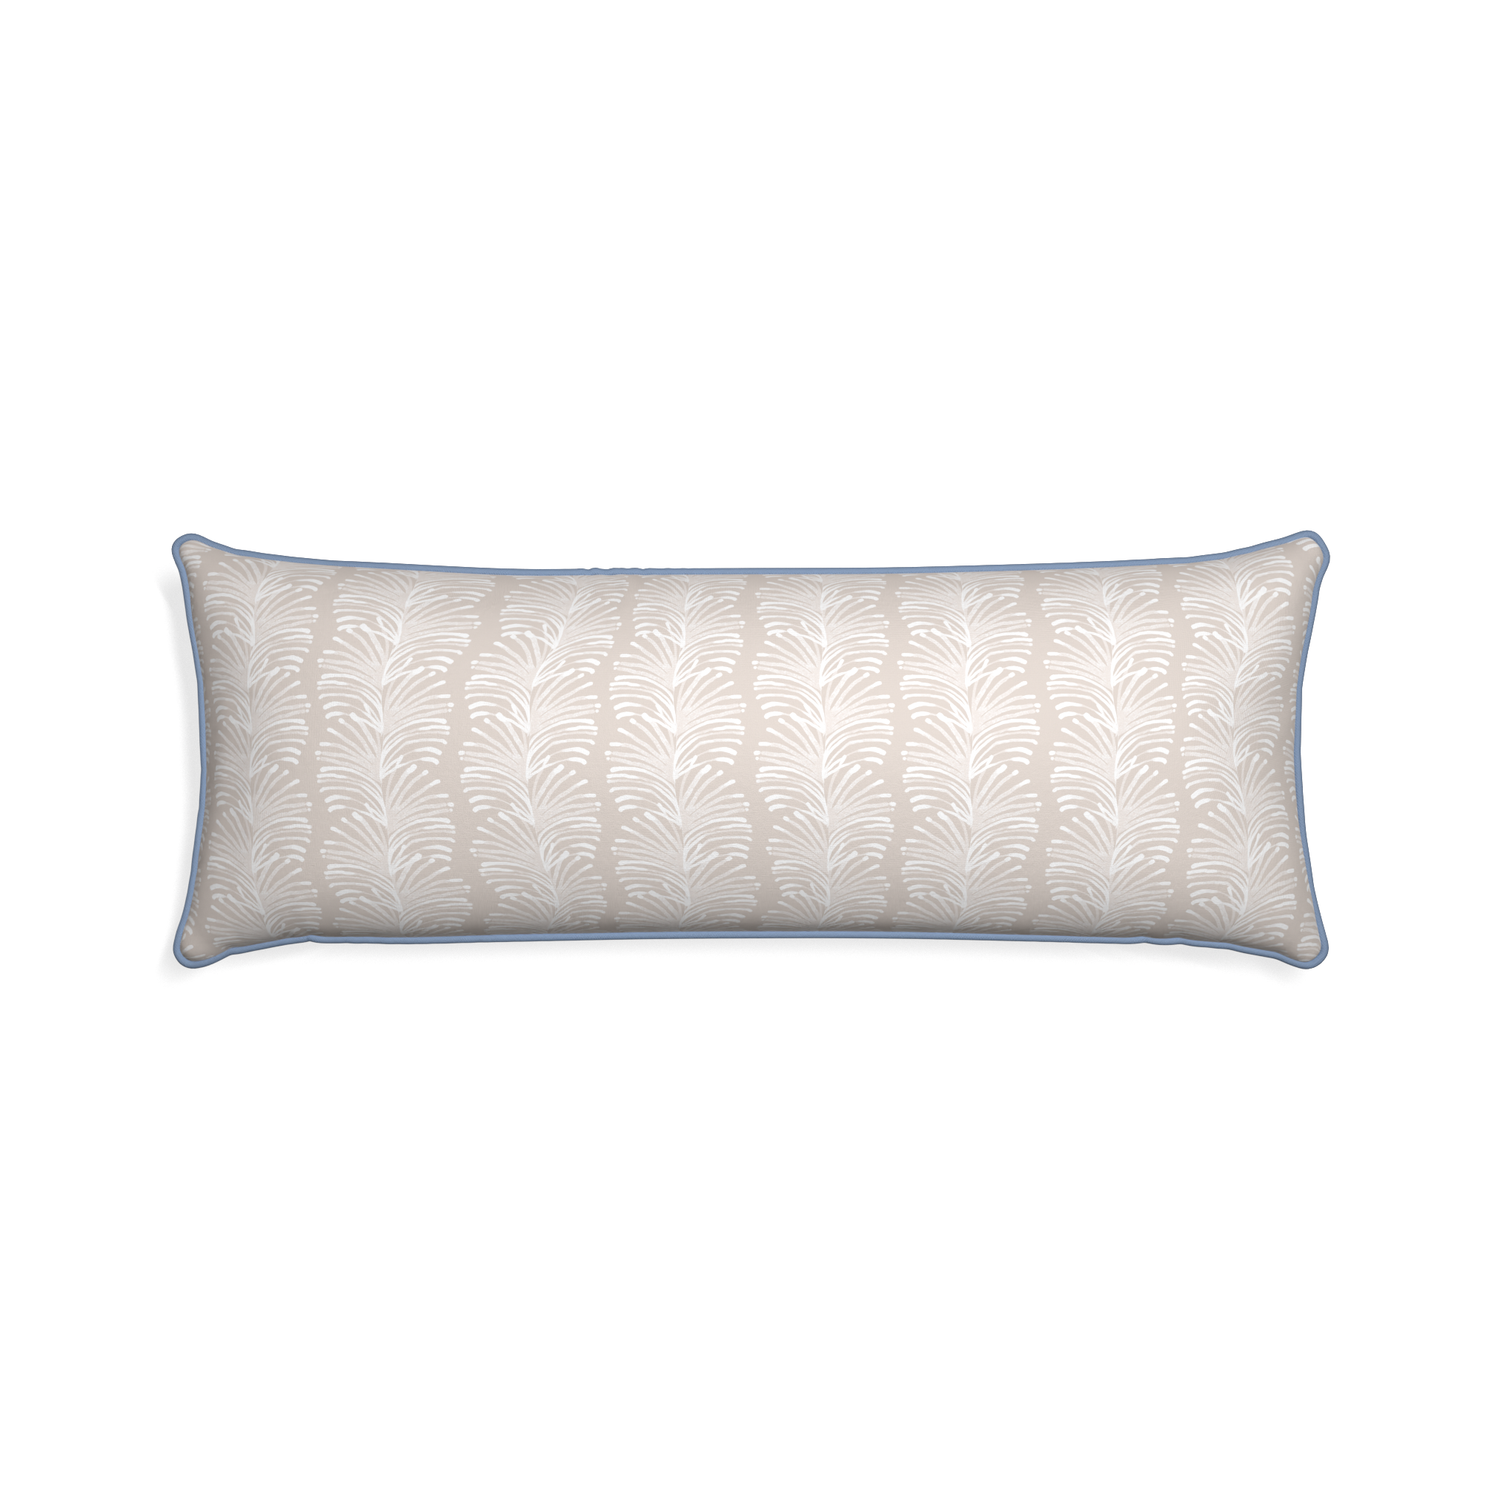 Xl-lumbar emma sand custom sand colored botanical stripepillow with sky piping on white background